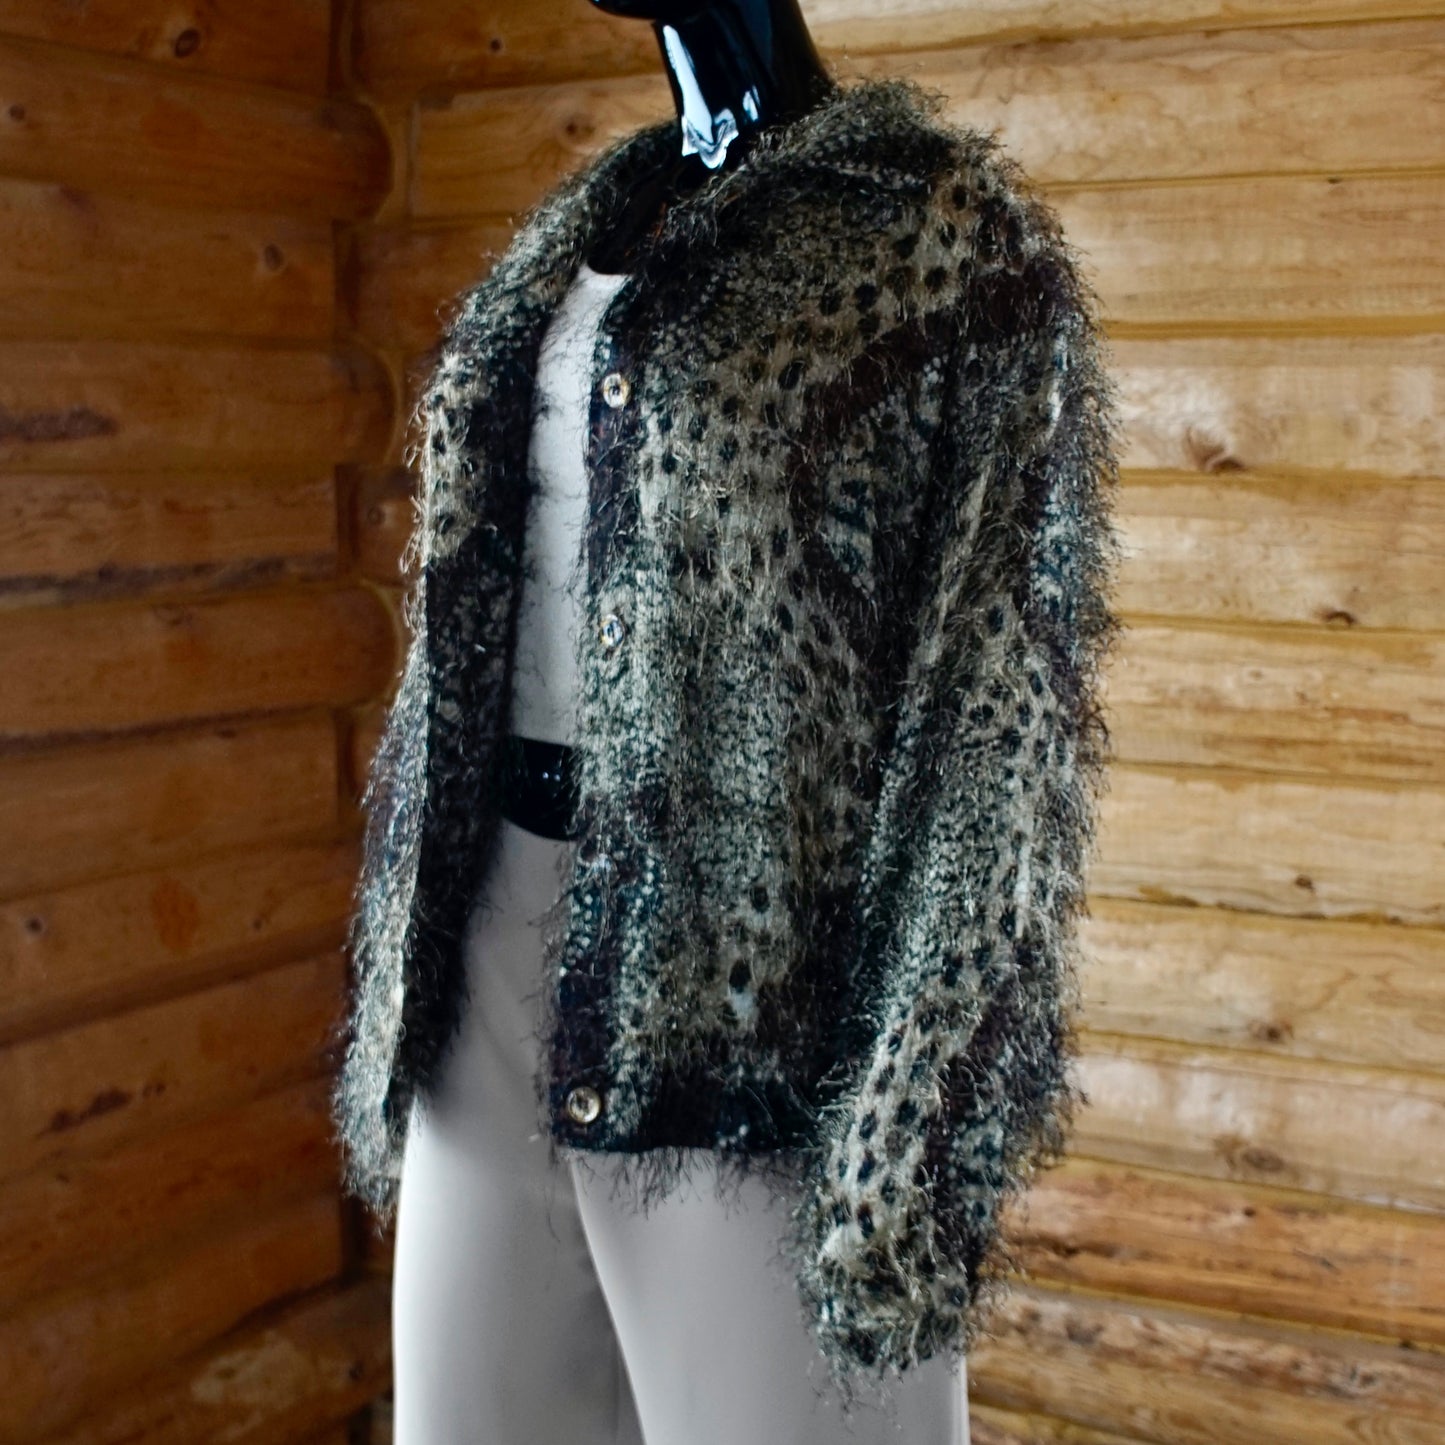 Vintage Dijon Collections Textured Leopard Cardigan 80's